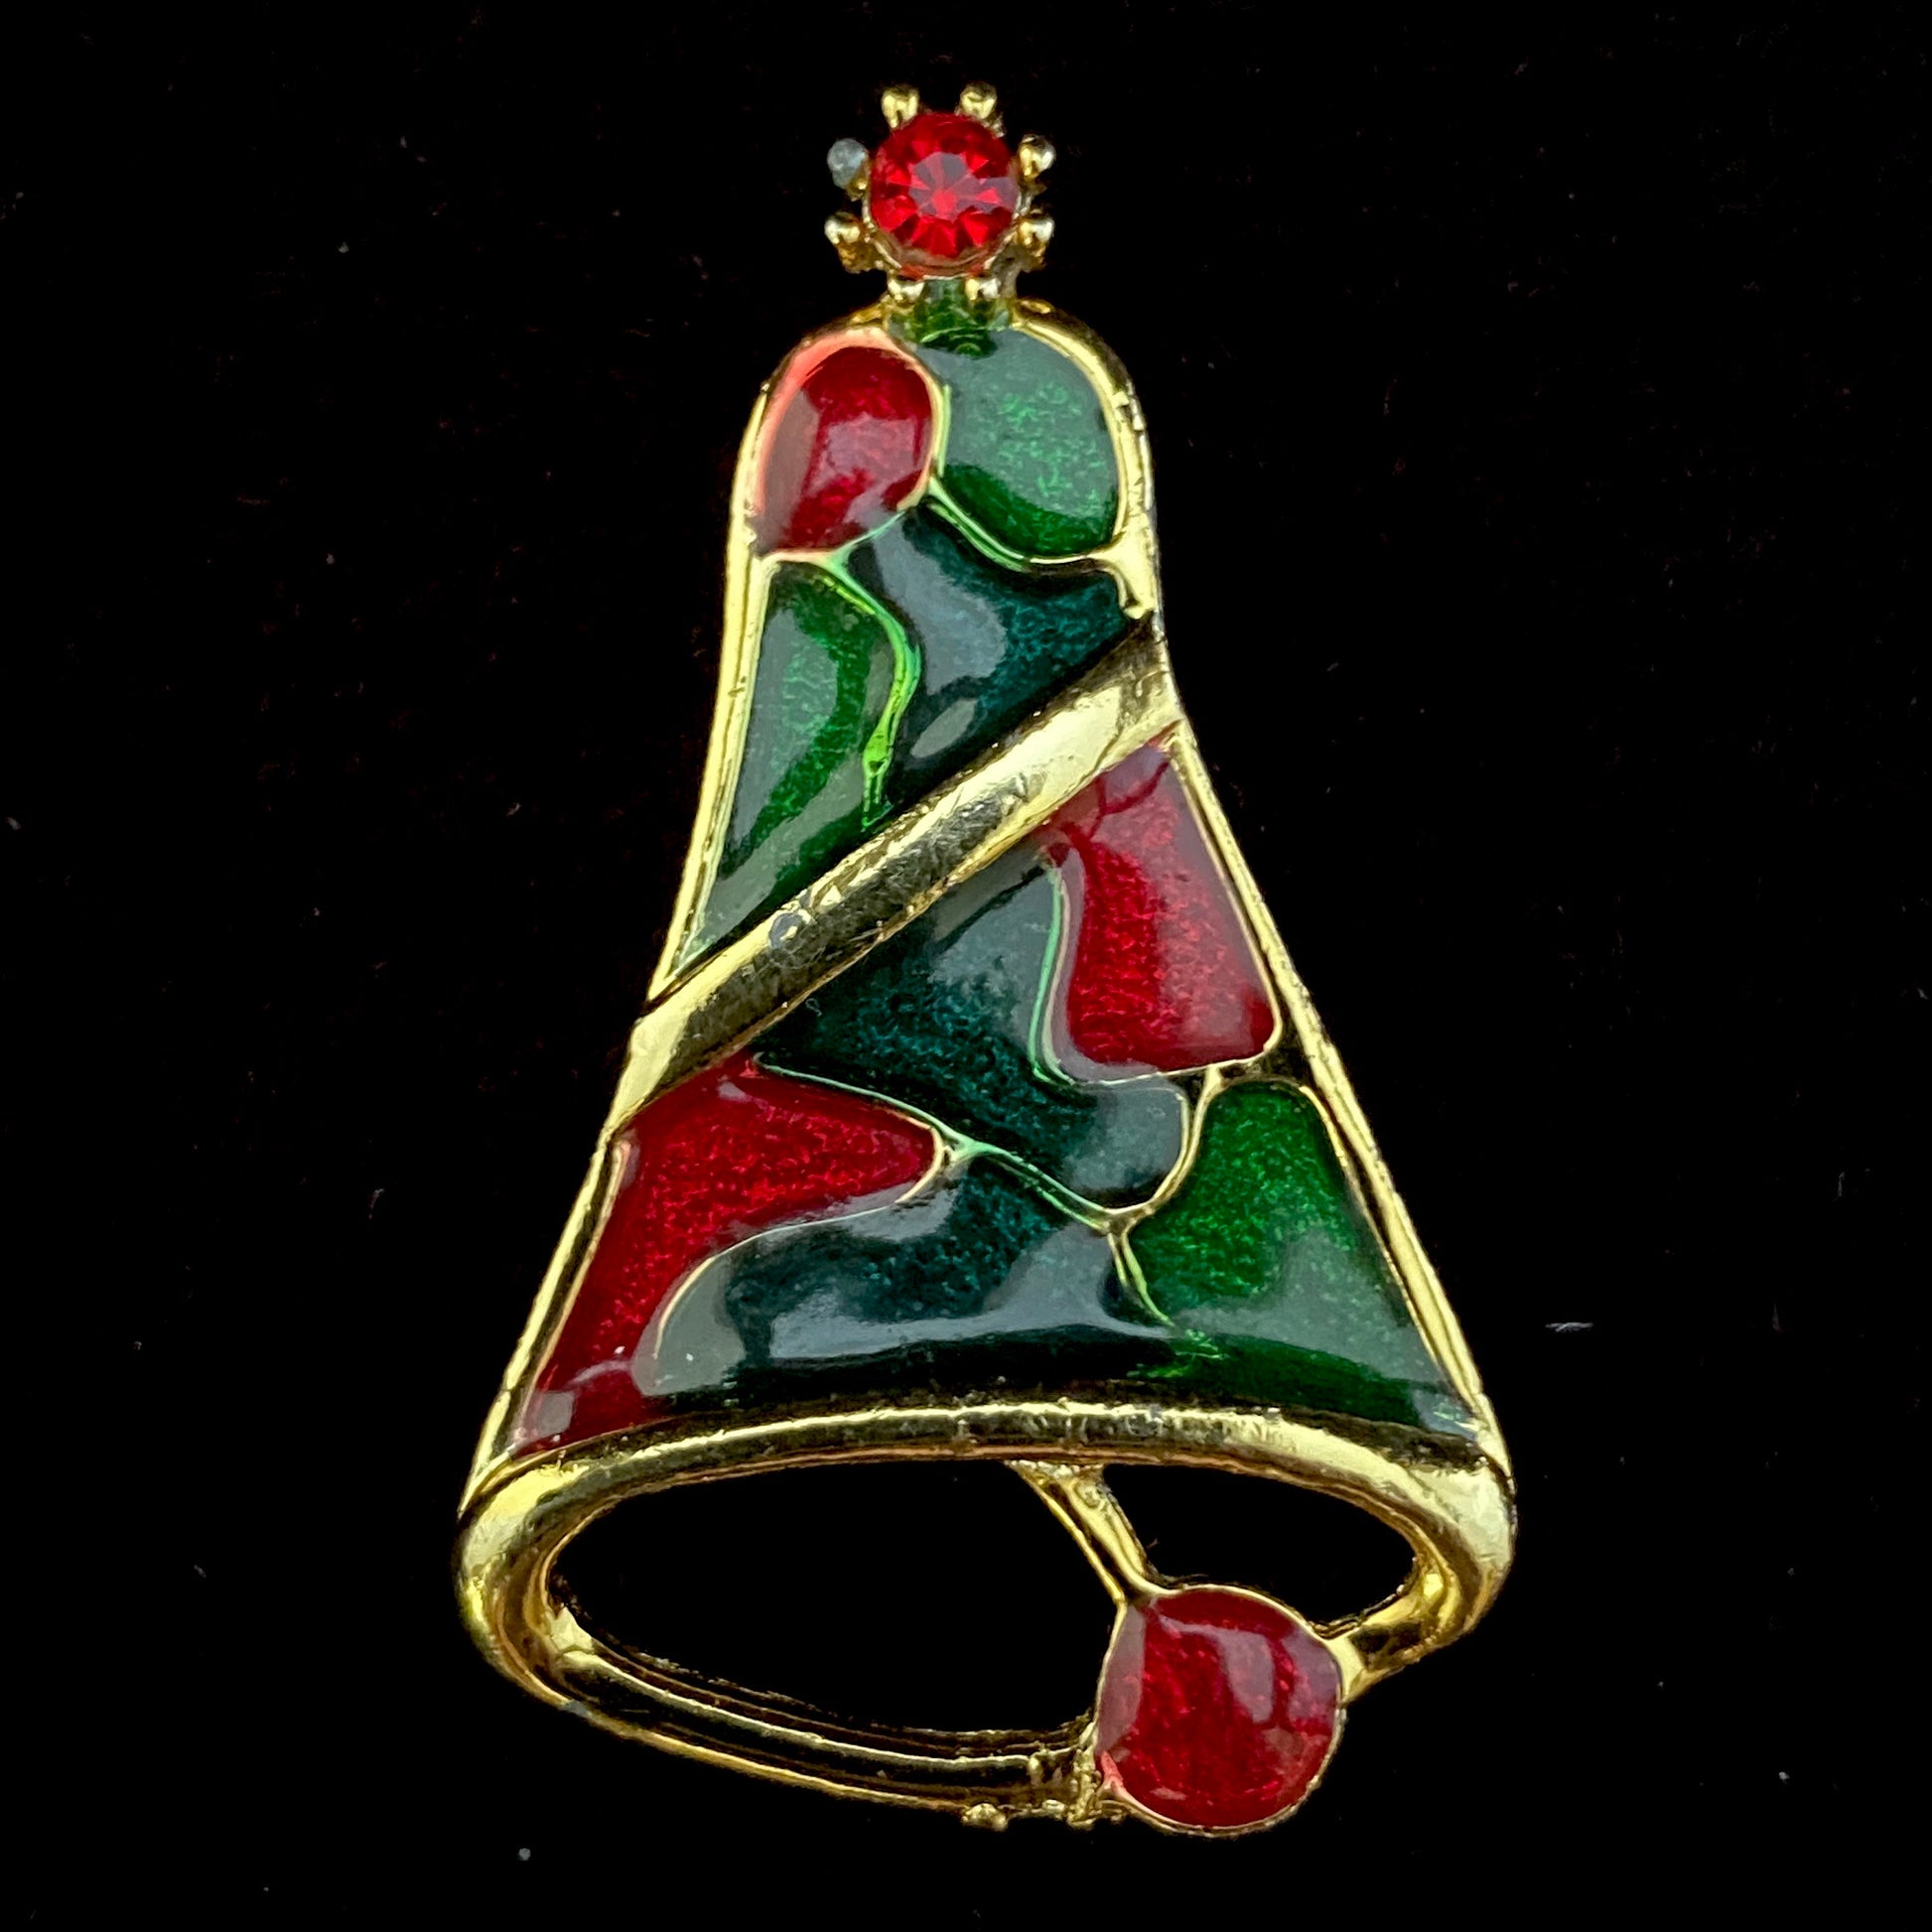 1960s BJ (Beatric Jewelry) Holiday Bell Brooch - Retro Kandy Vintage